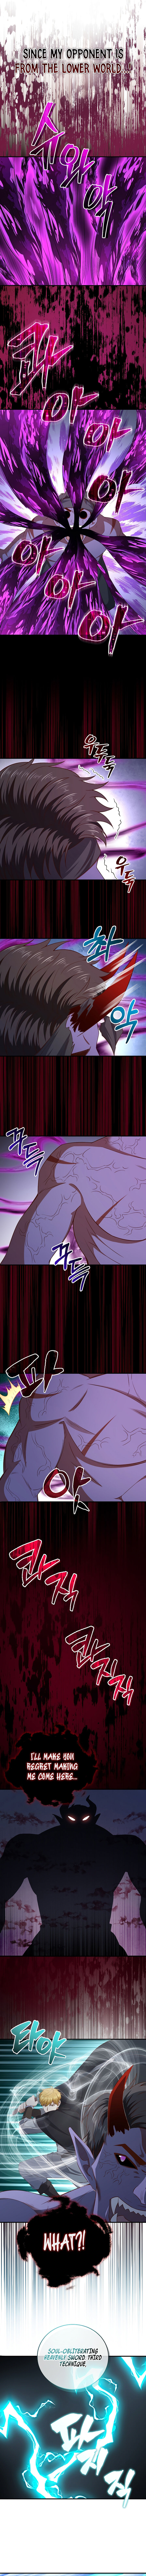 The Lords Coins Arent Decreasing Chapter 96 Page 6